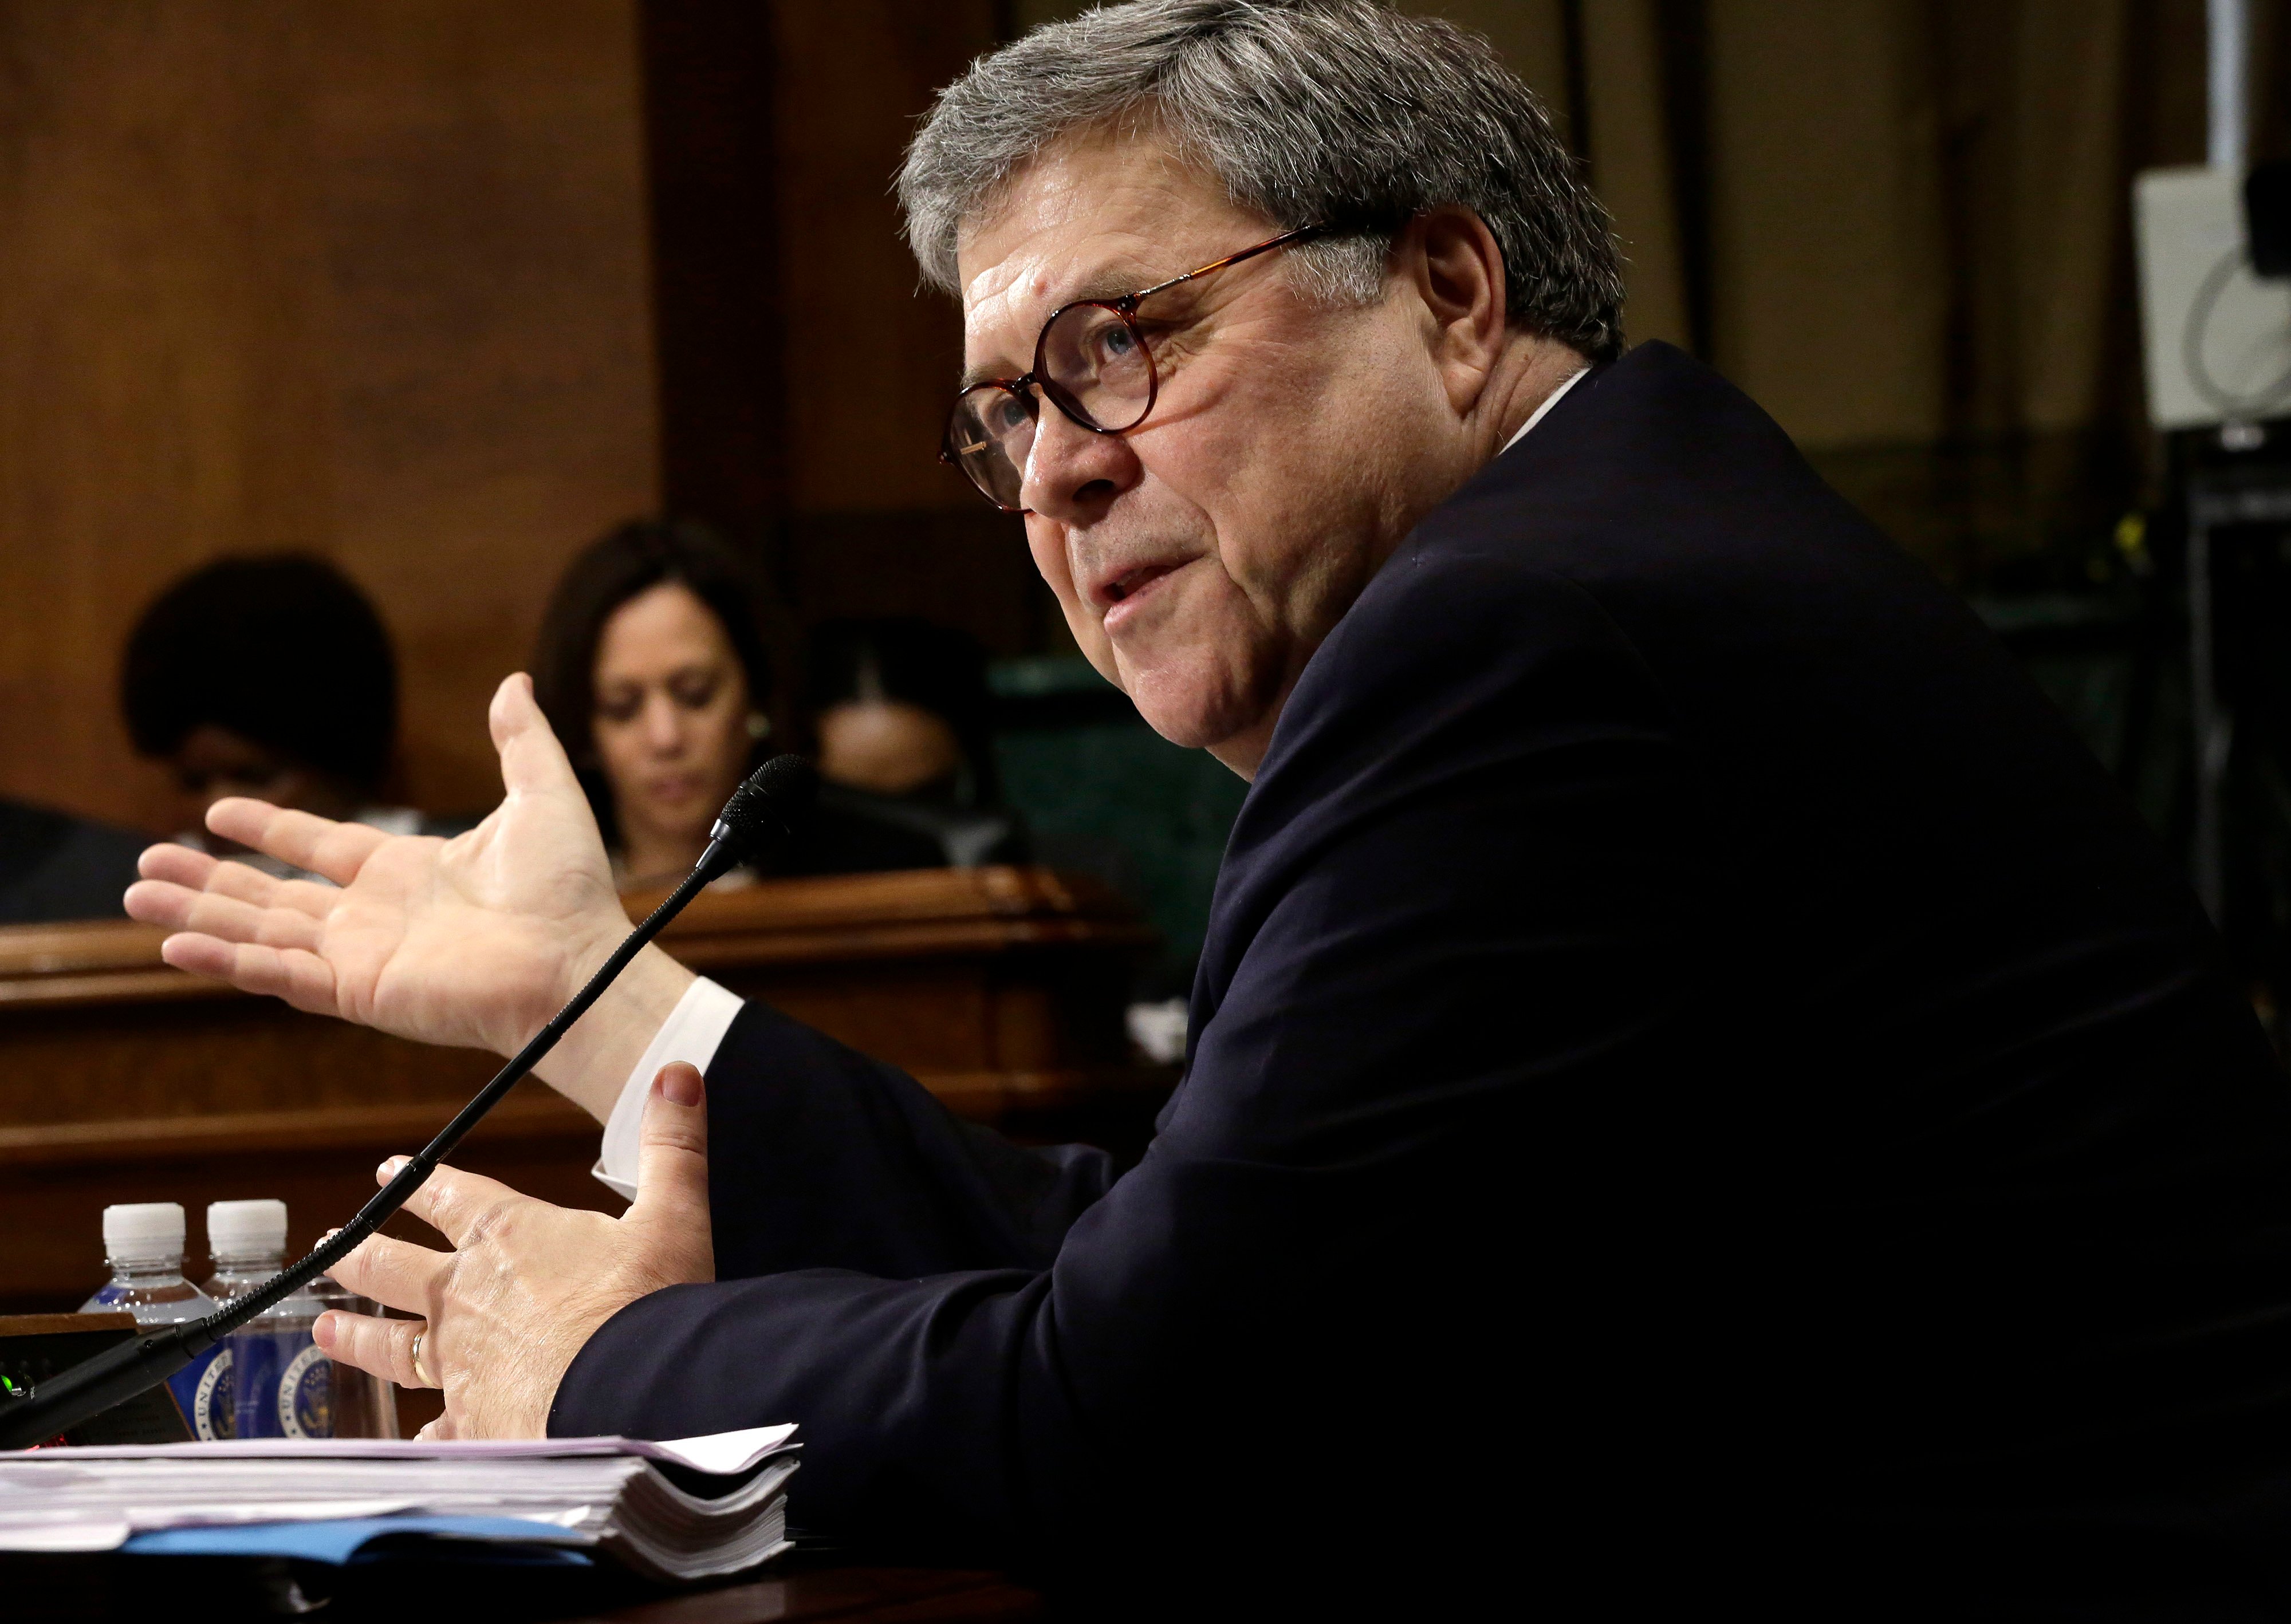 WASHINGTON, DC - MAY 1: U.S. Attorney General William Barr testifies before the Senate Judiciary Committee May 1, 2019 in Washington, DC. Barr testified on the Justice Department's investigation of Russian interference with the 2016 presidential election. (Photo by Alex Wong/Getty Images)